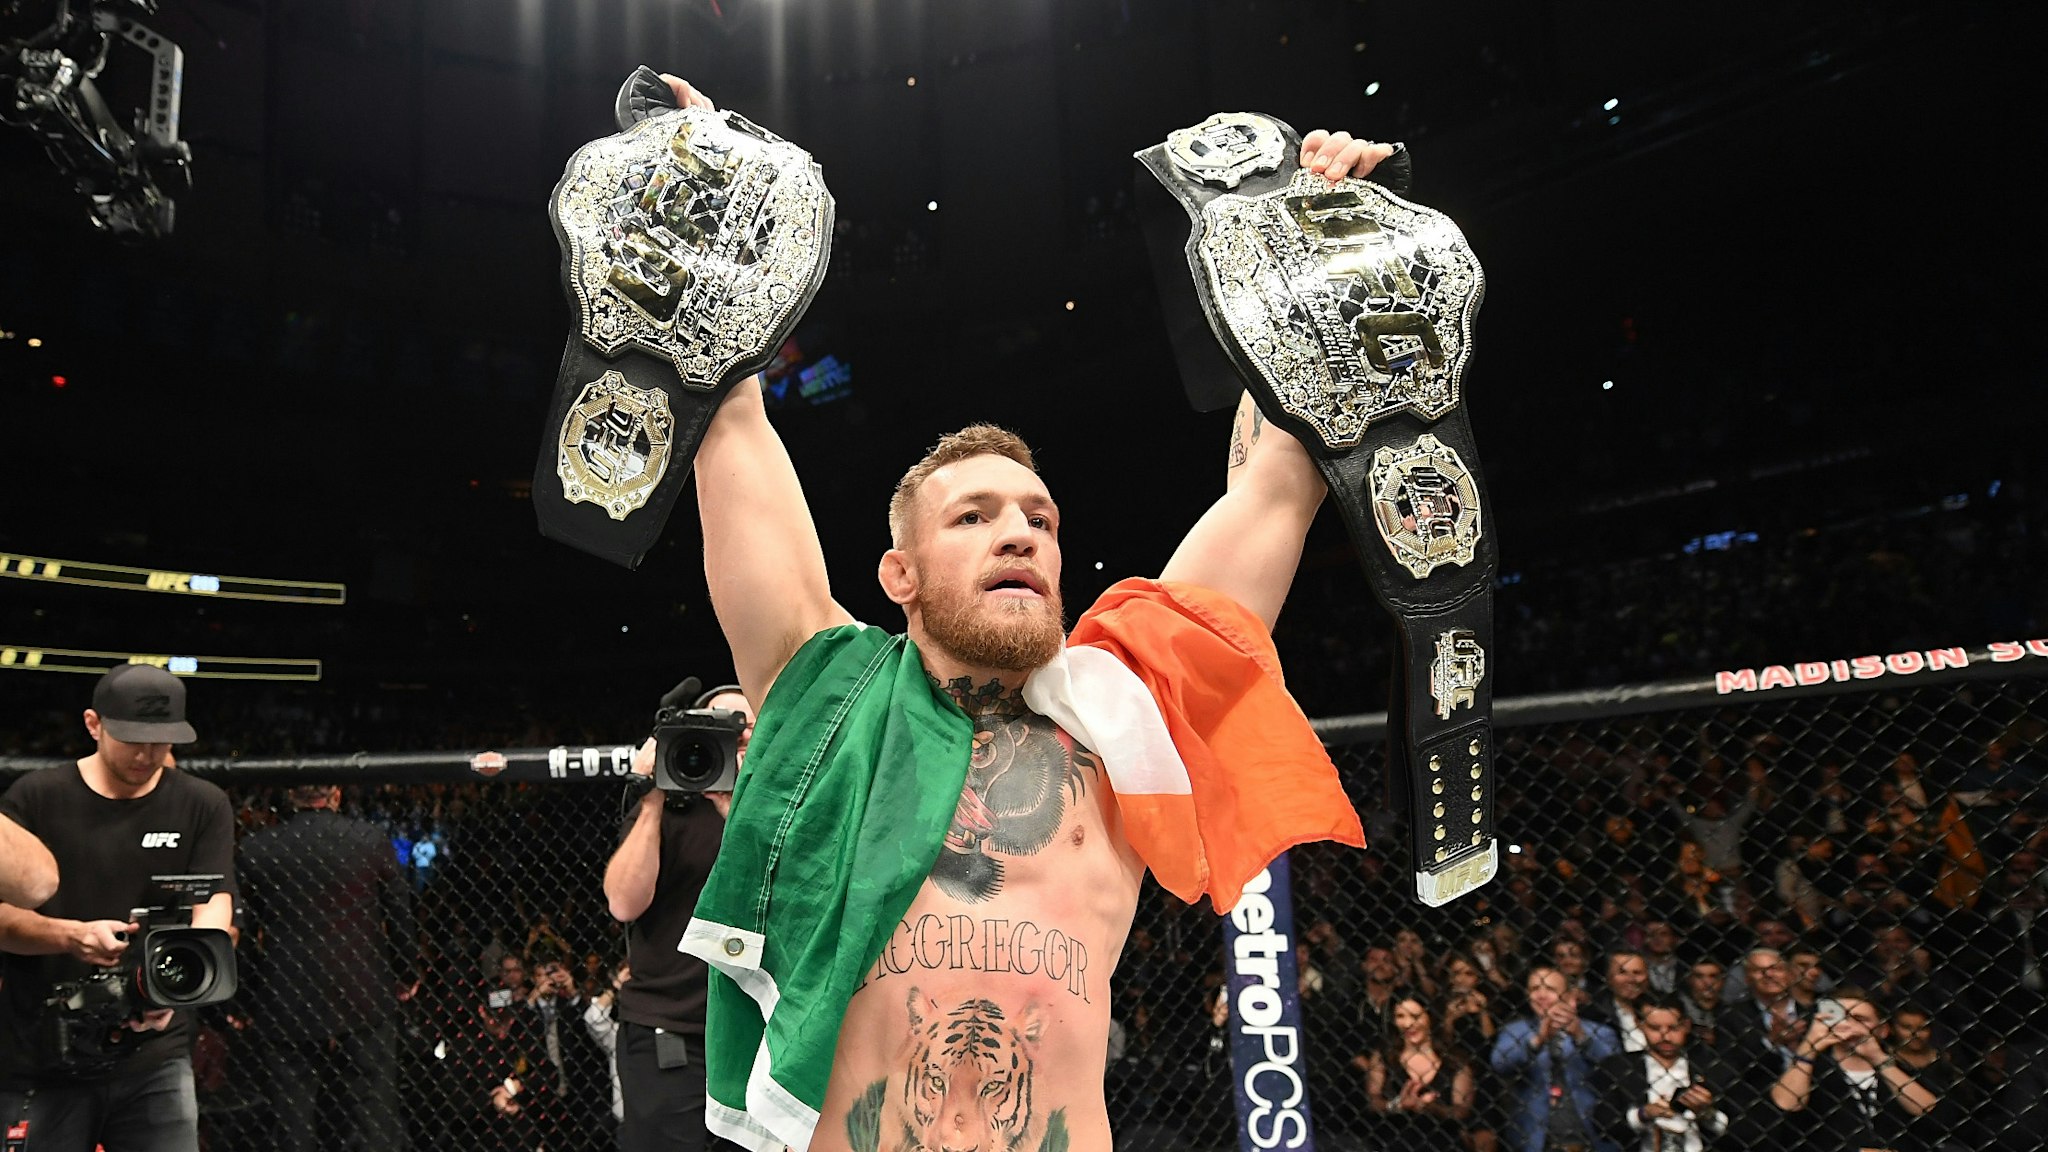 NEW YORK, NY - NOVEMBER 12: UFC lightweight and featherweight champion Conor McGregor of Ireland celebrates after defeating Eddie Alvarez in their UFC lightweight championship fight during the UFC 205 event at Madison Square Garden on November 12, 2016 in New York City.